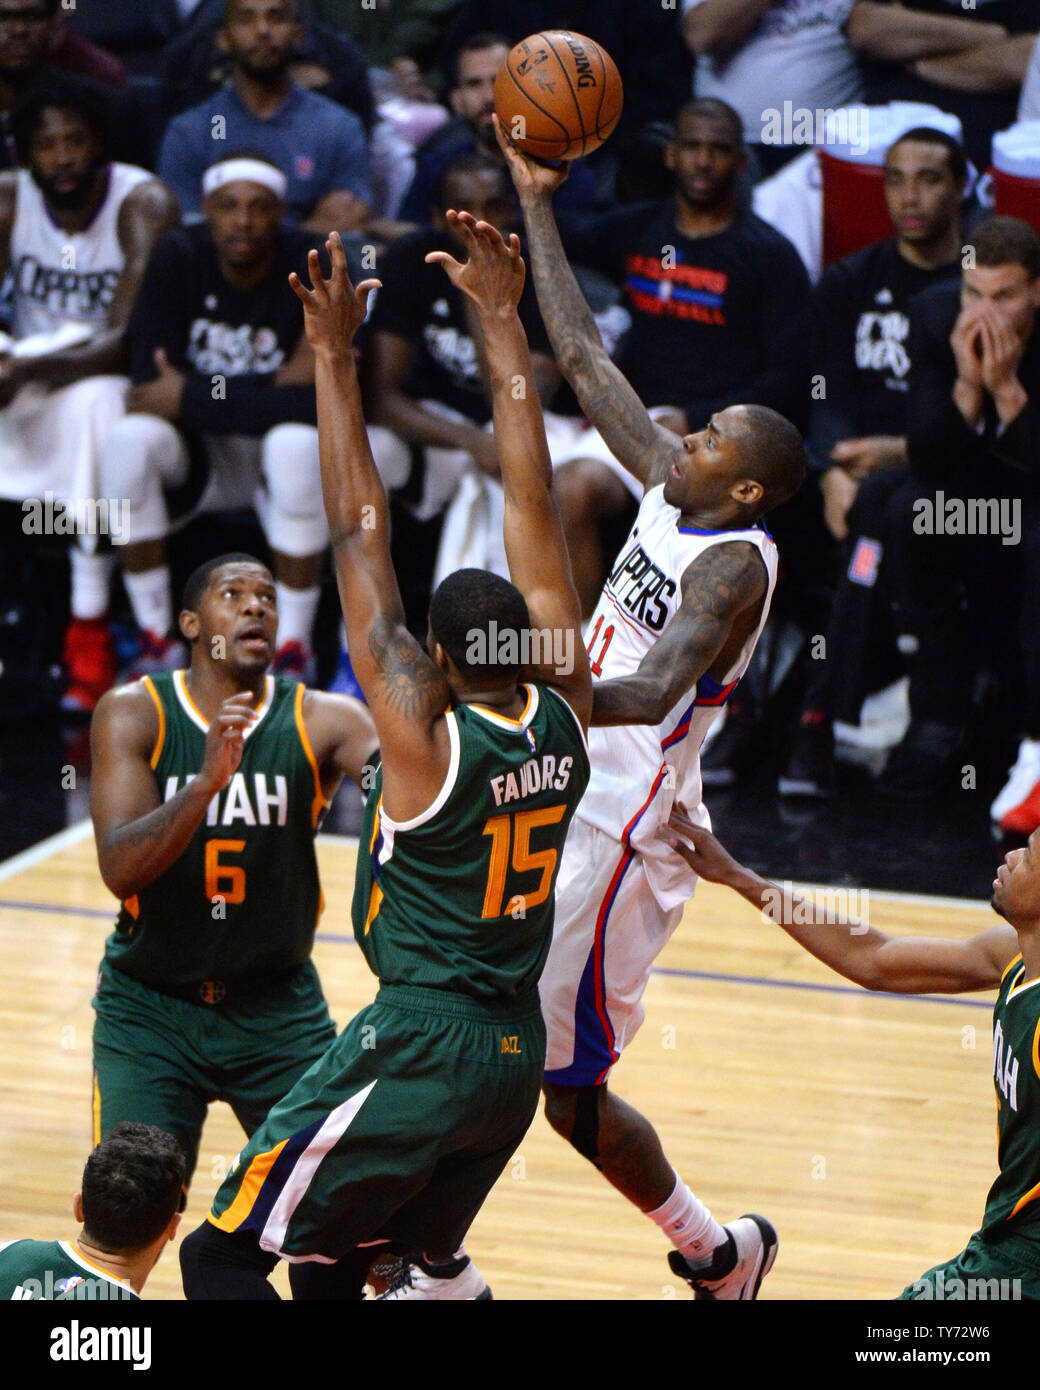 Clippers' guard Jamal Crawford shoots over Jazz forward Derrick Favors (15) in game 5 of their best-of seven Western Conference playoff series  at Staples Center in Los Angeles on April 25, 2017.  Photo by Jon SooHoo/UPI Stock Photo